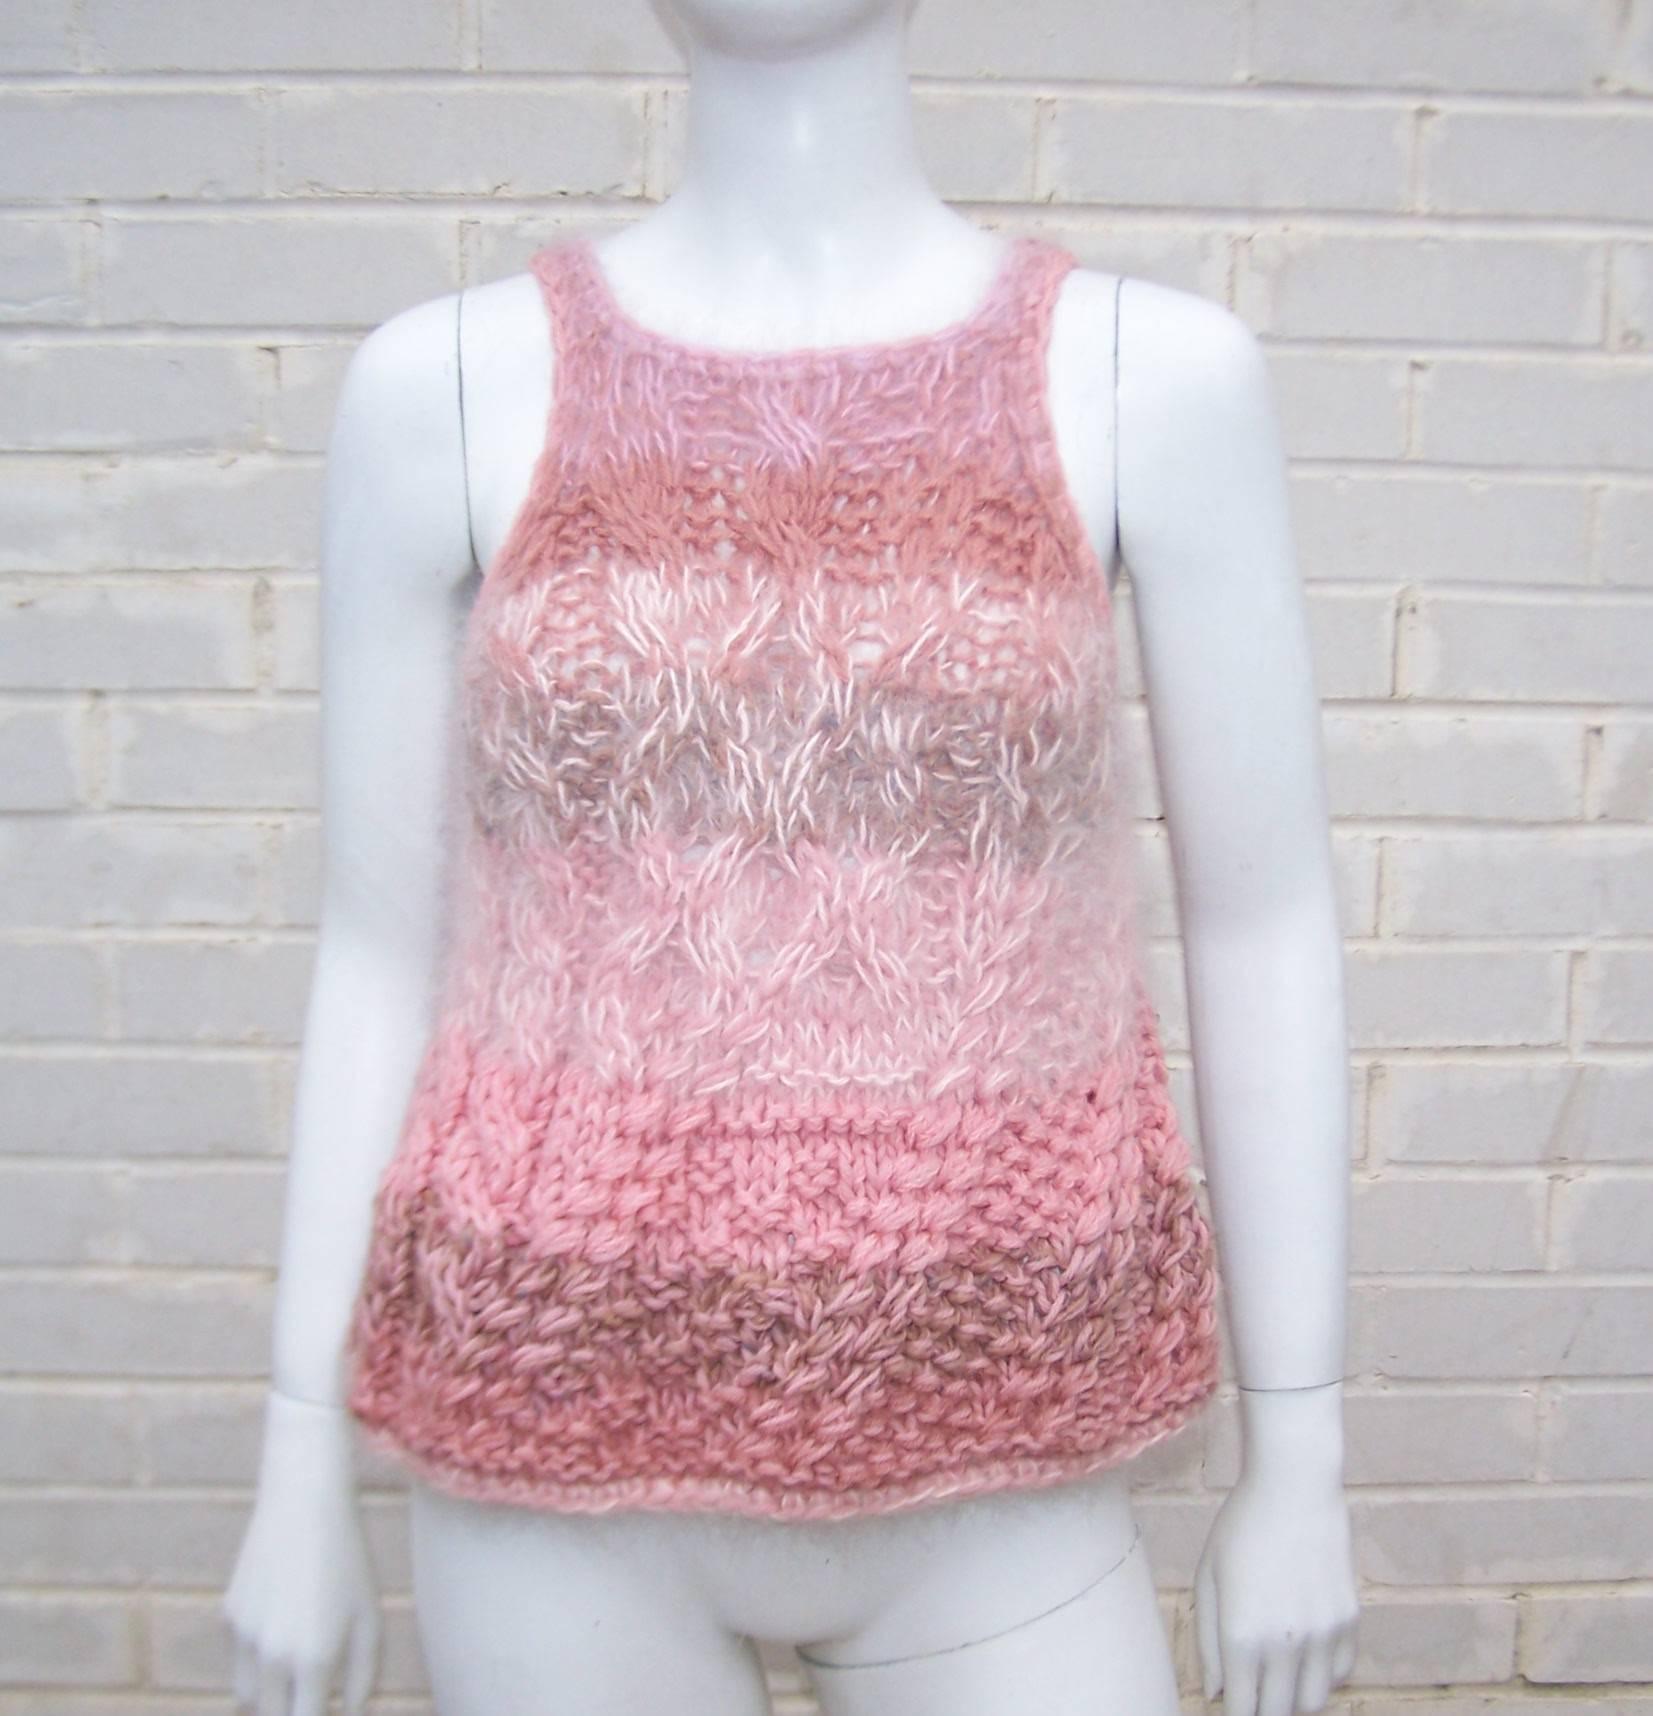 Get prepared to be touched!  This Joan Vass angora sweater top is irresistable!  The hand knit powder pink angora is mixed with a light brown and darker pink wool and on close inspection you can see a hint of blue towards the hemline.  The trapeze